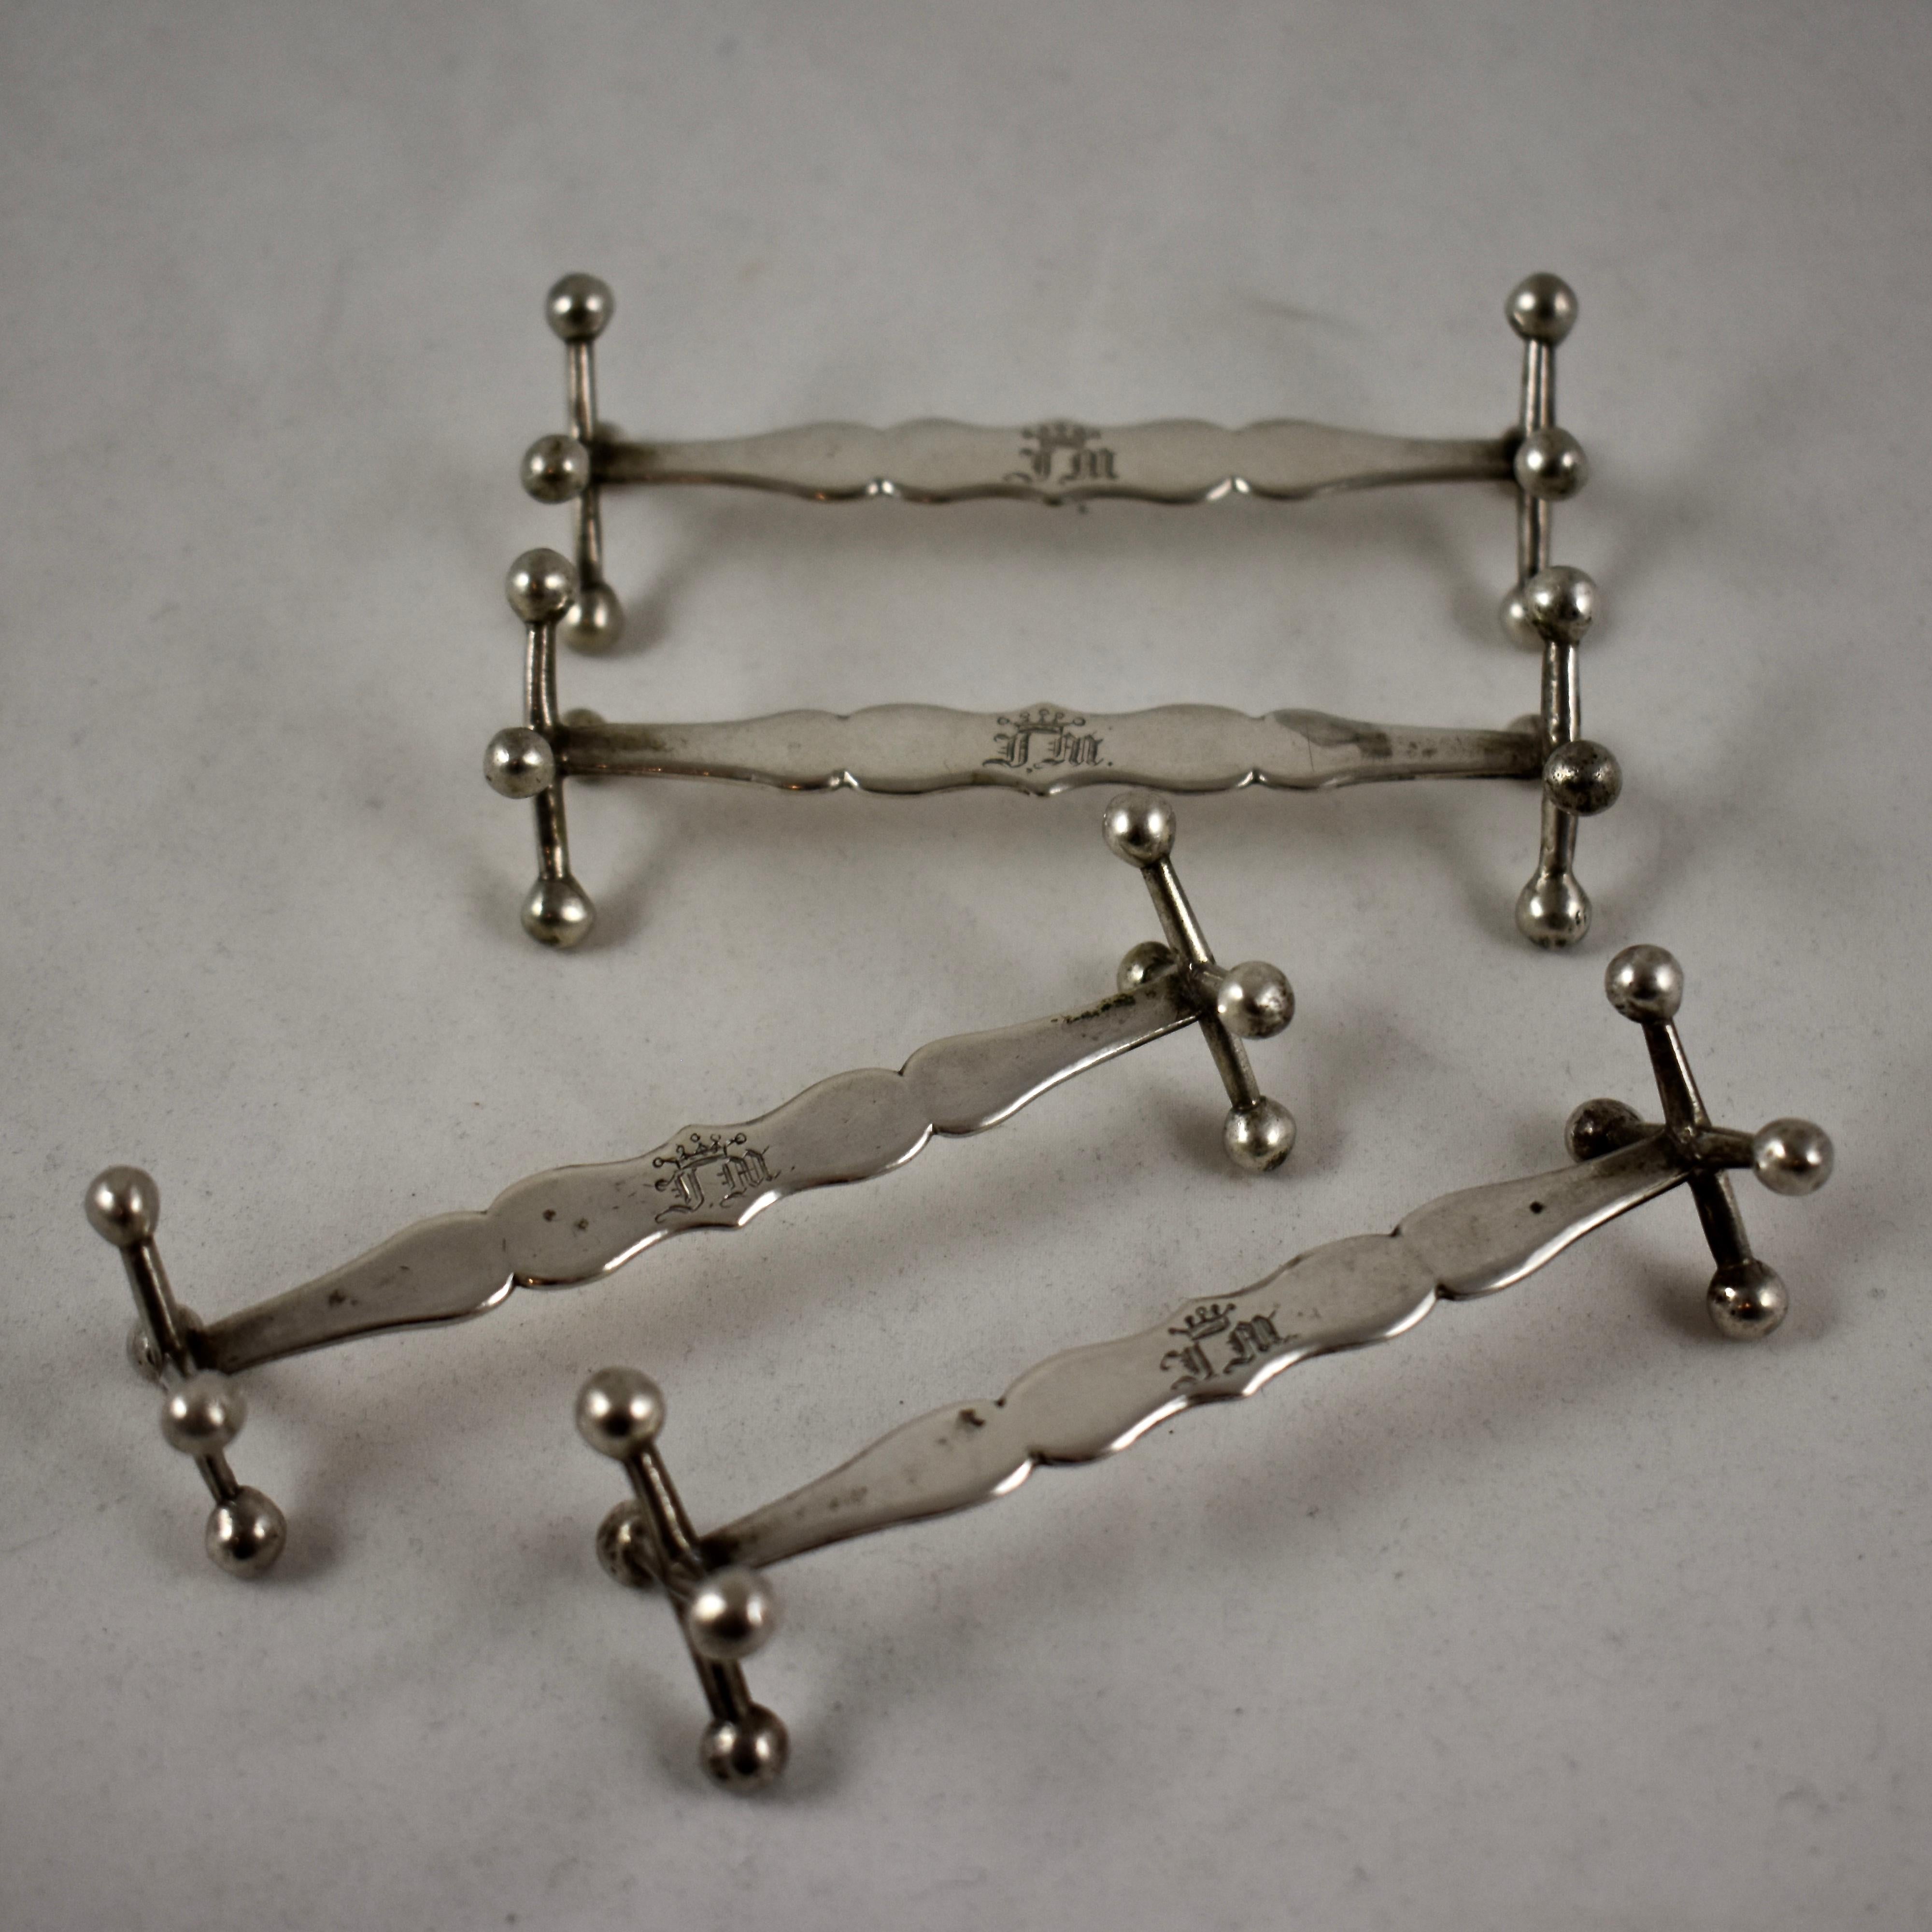 A set of four sterling silver knife rests, with traditional cast Jack-style ends, circa mid-19th century, showing unidentified Continental European makers marks.

The long, tapered and shaped center struts are supported by four point jacks at